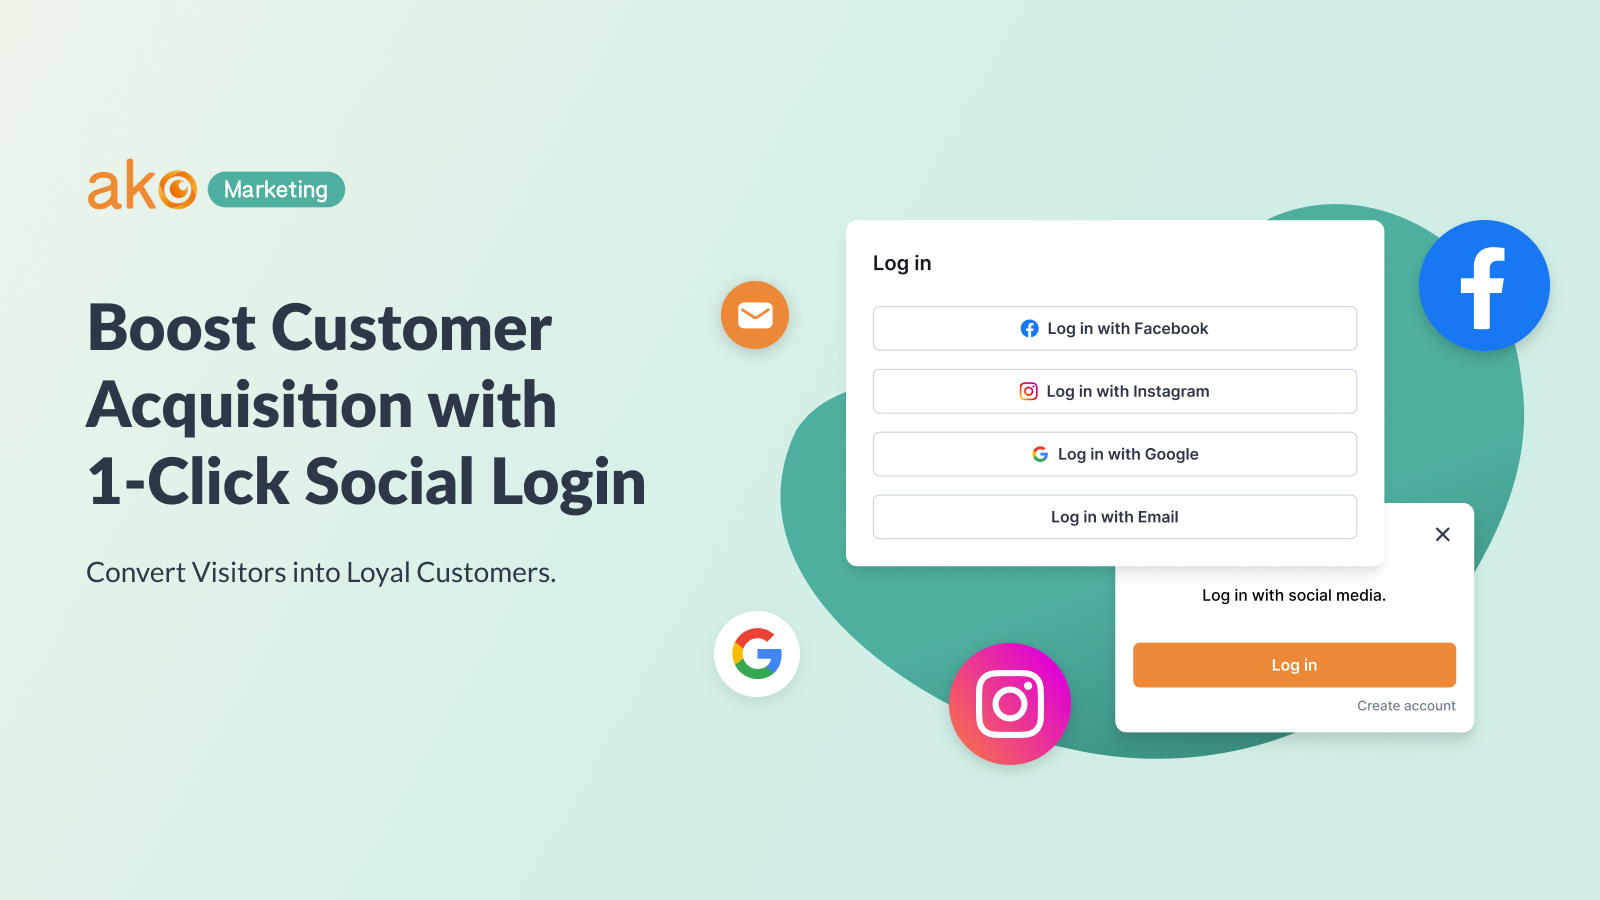 Boost Customer Acquisition with 1-Click Social Login